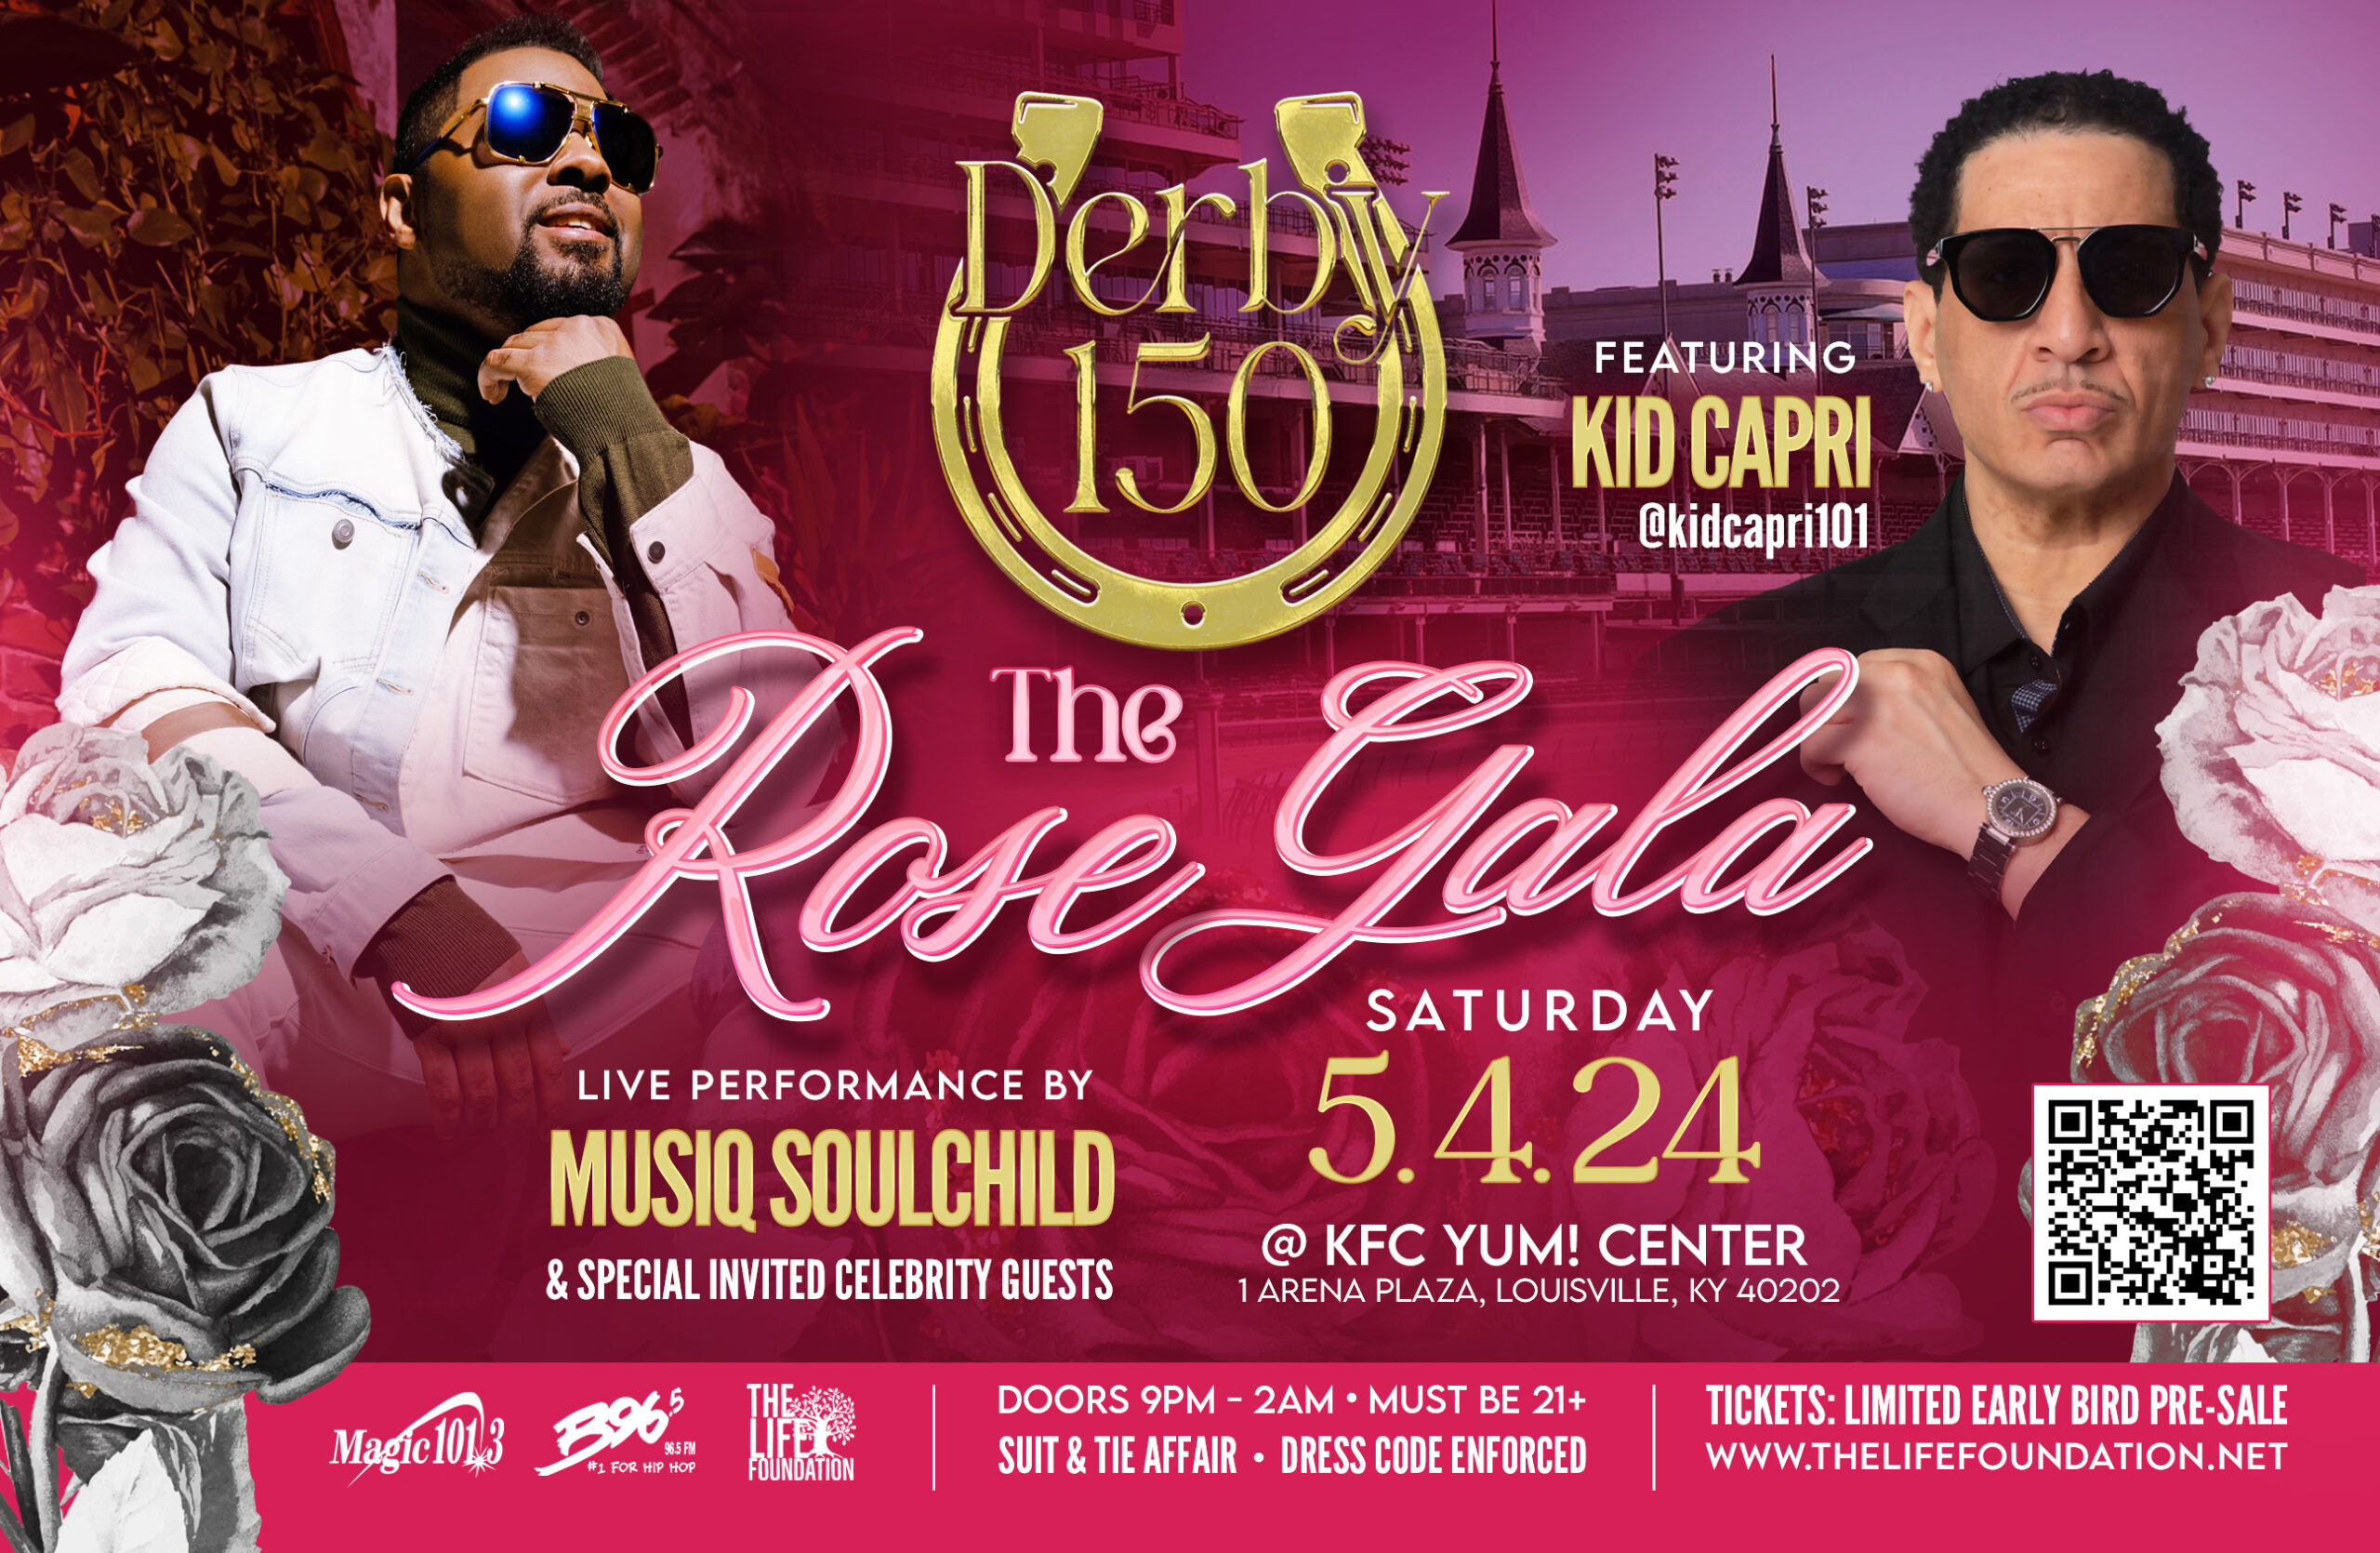 <h1 class="tribe-events-single-event-title">B96.5 & The Life Foundation Present Derby 150 The Rose Gala</h1>